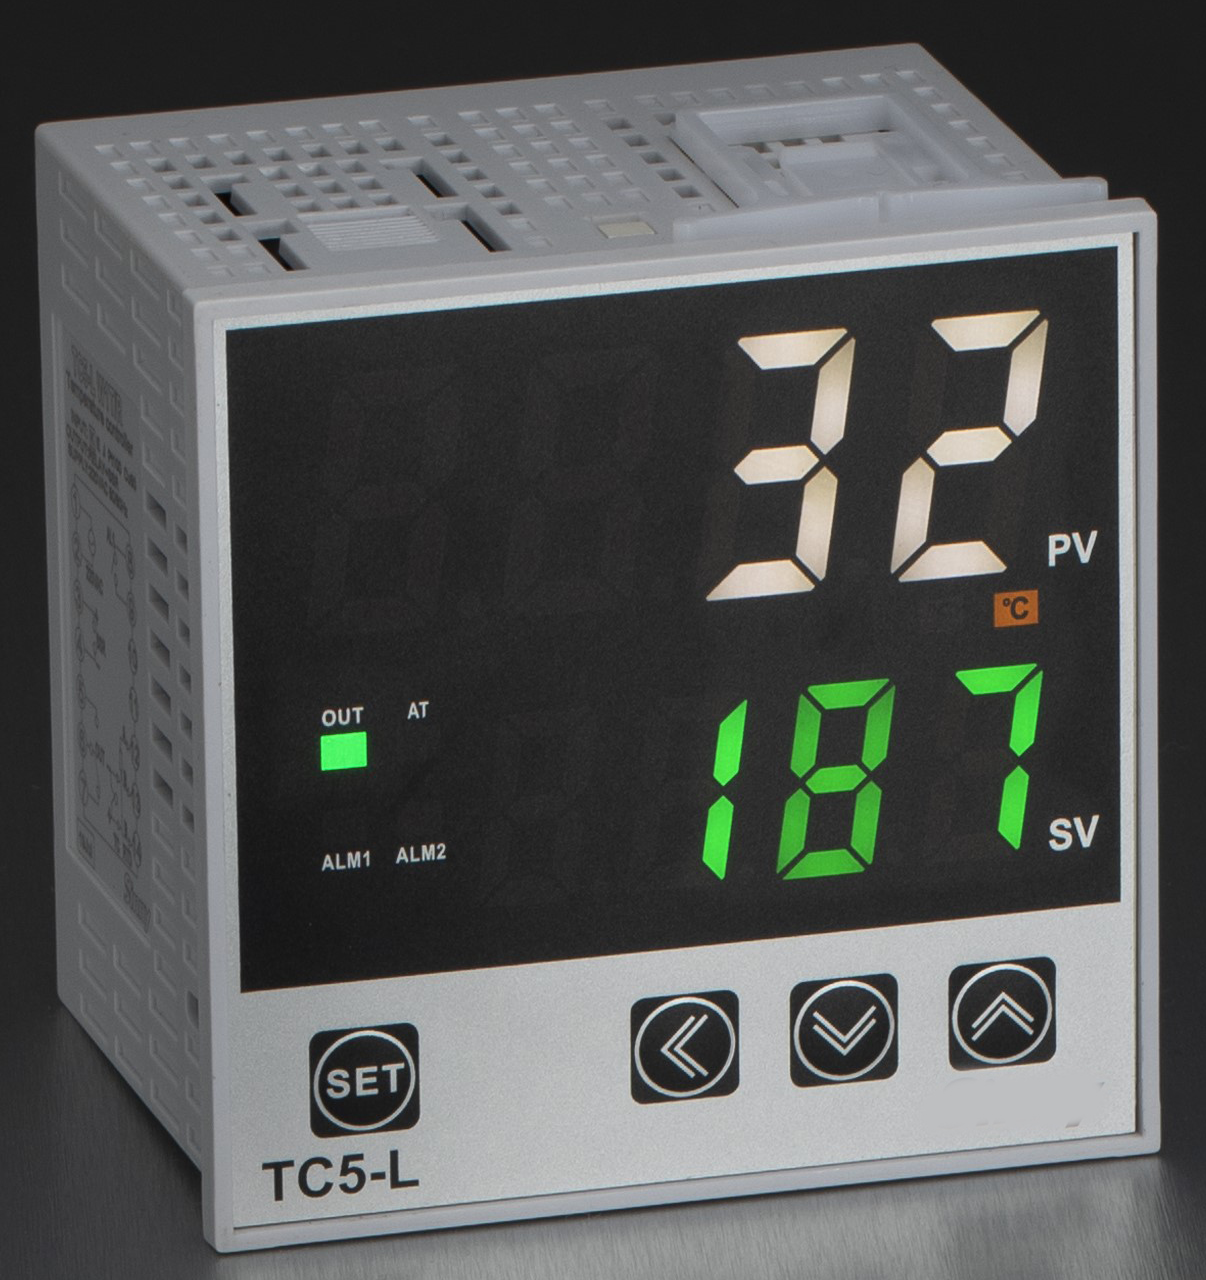 FC5-M-1A-1-G-2-C PID Controller, 100-240VAC with 1 Alarm, RS485, E,J,N,T,S,R,B Thermocouple, Linear Current/Voltage and  PT100/Cu20 RTD Input, 72x72mm,4-20mA Output